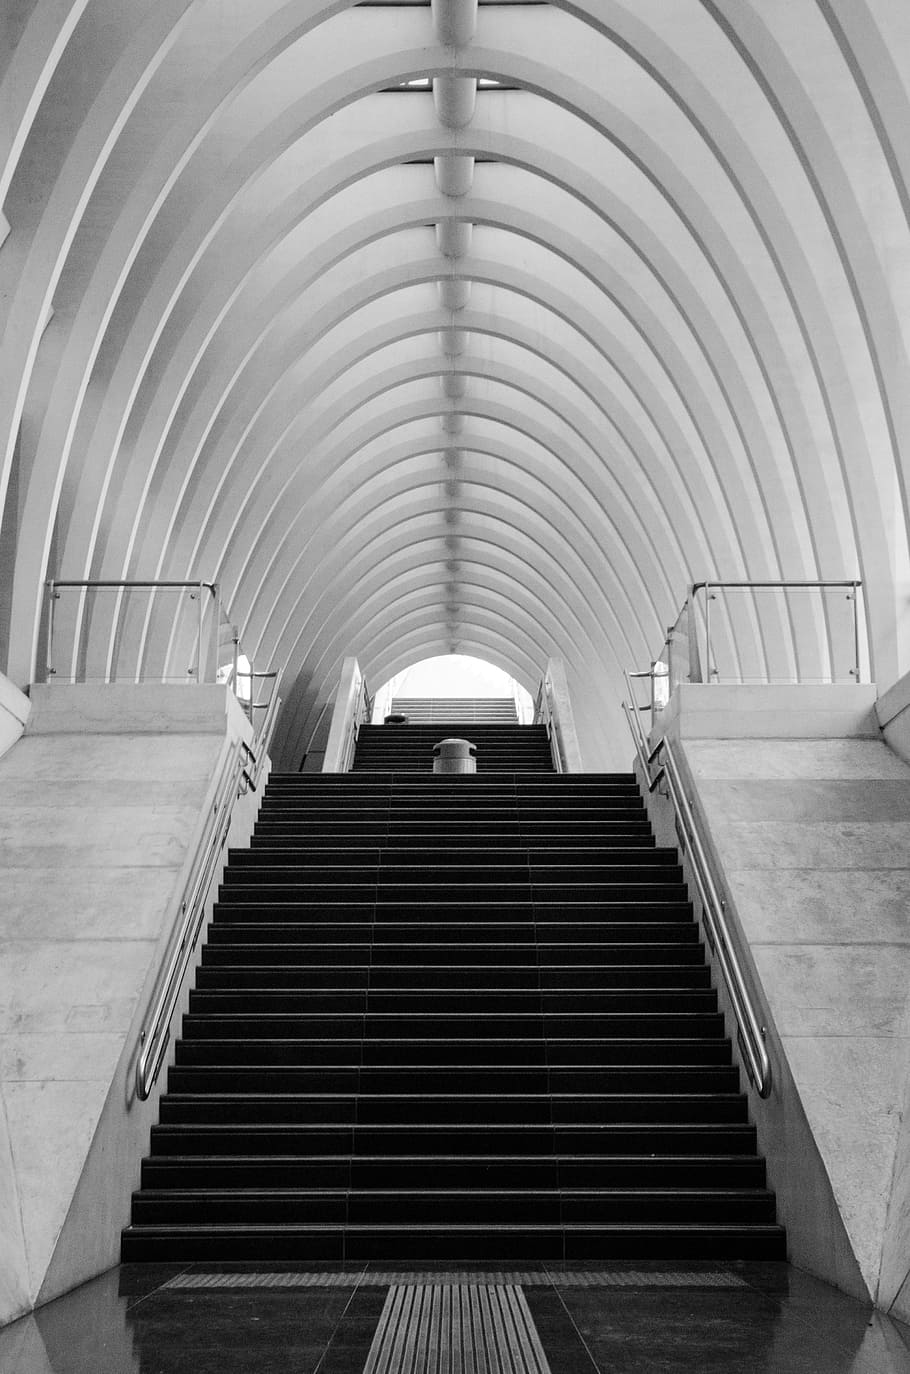 Architecture, Symmetry, Building, repetition, lines, station